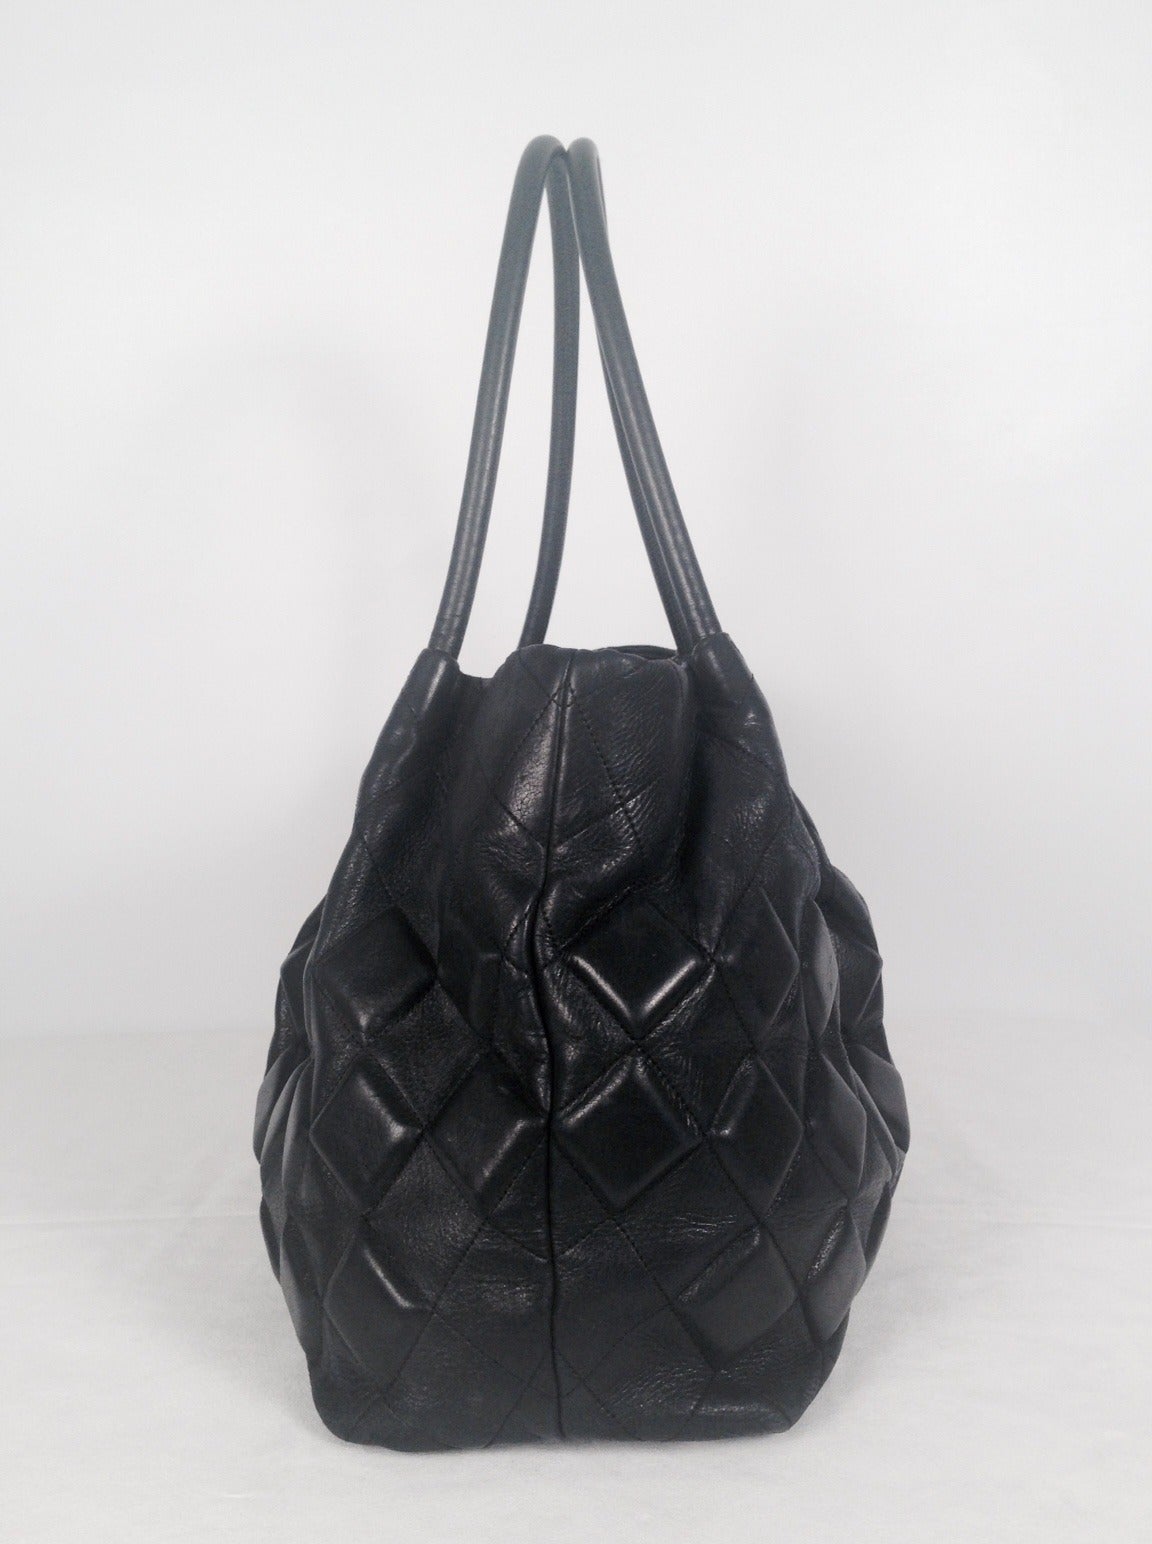 This exquisite Chanel deep navy tote was crafted between 2008 and 2009.  Hard to find?  Absolutely!  Highly collectible bag features signature diamond topstitch design with slightly gathered silhouette.  The piece de resistance? Alternating rows of